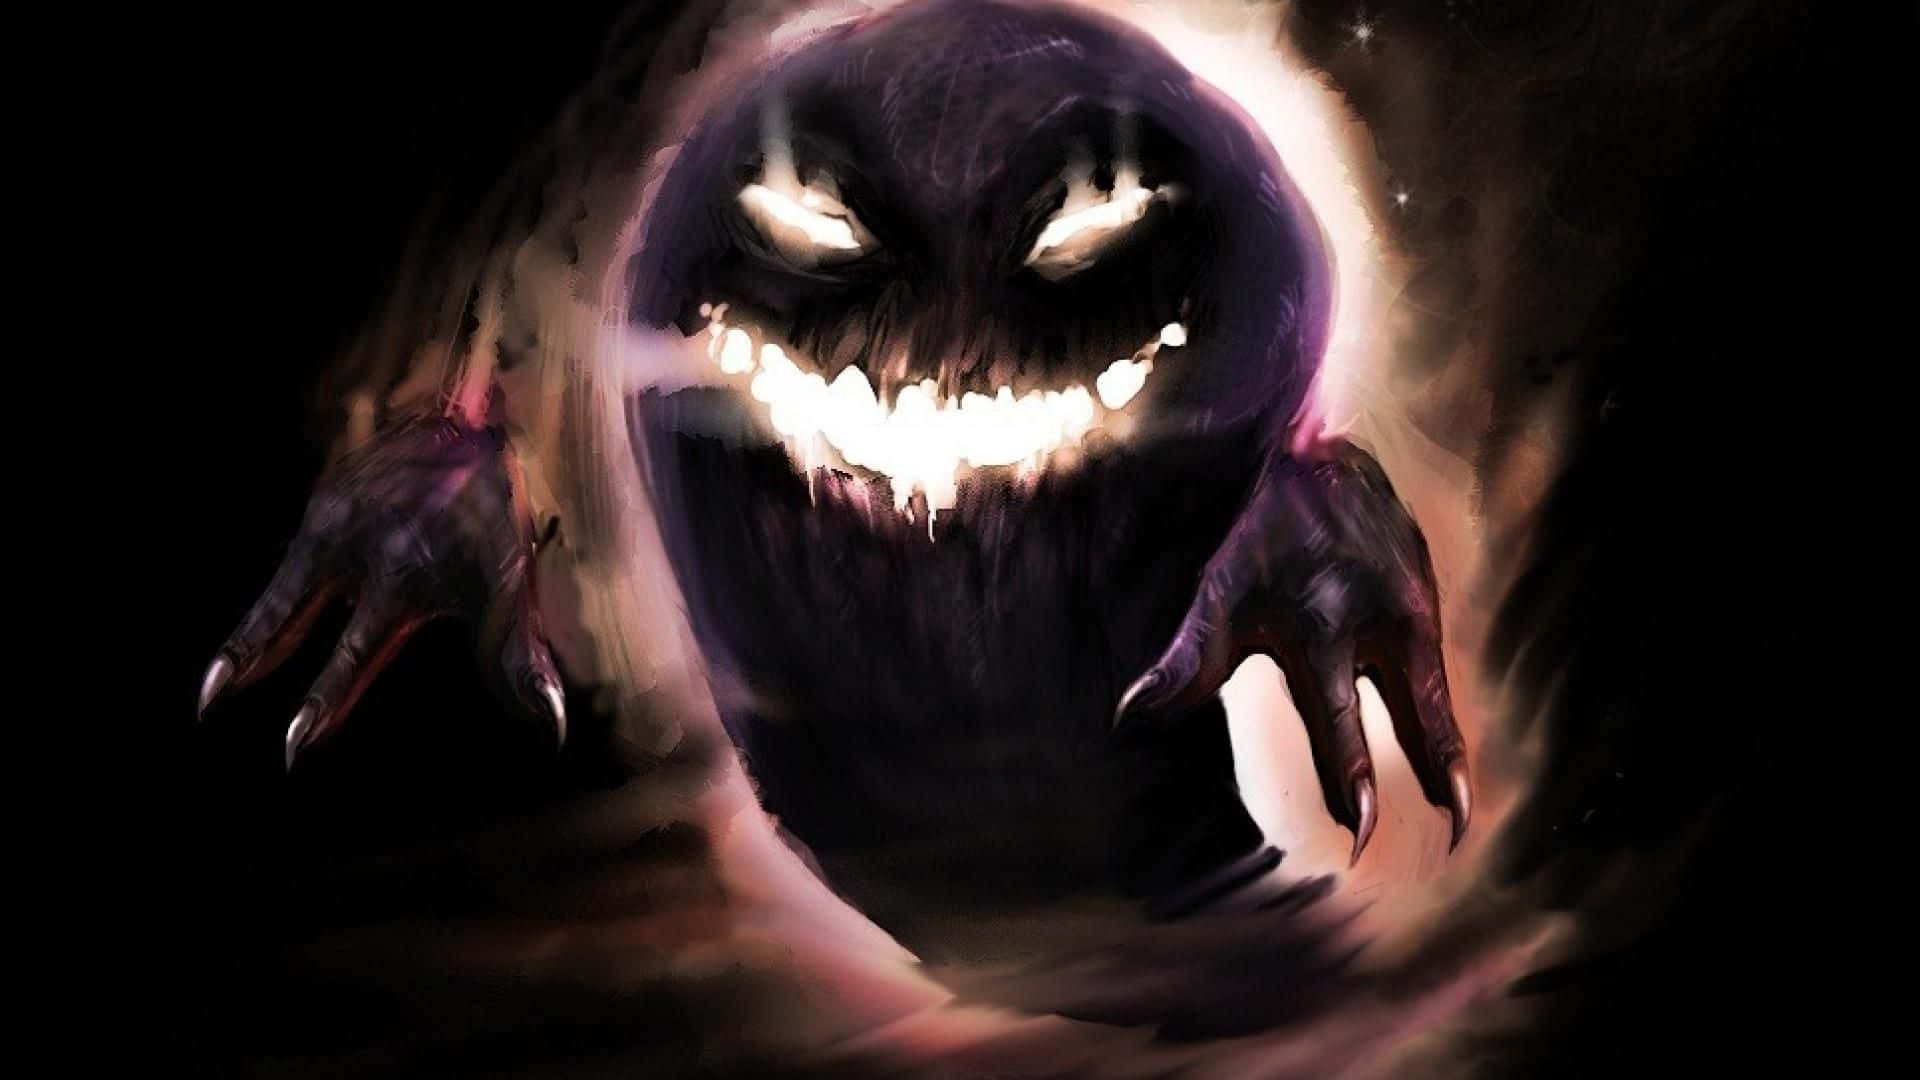 Feast your eyes upon the mesmerizing Ghost-type Pokemon! Wallpaper